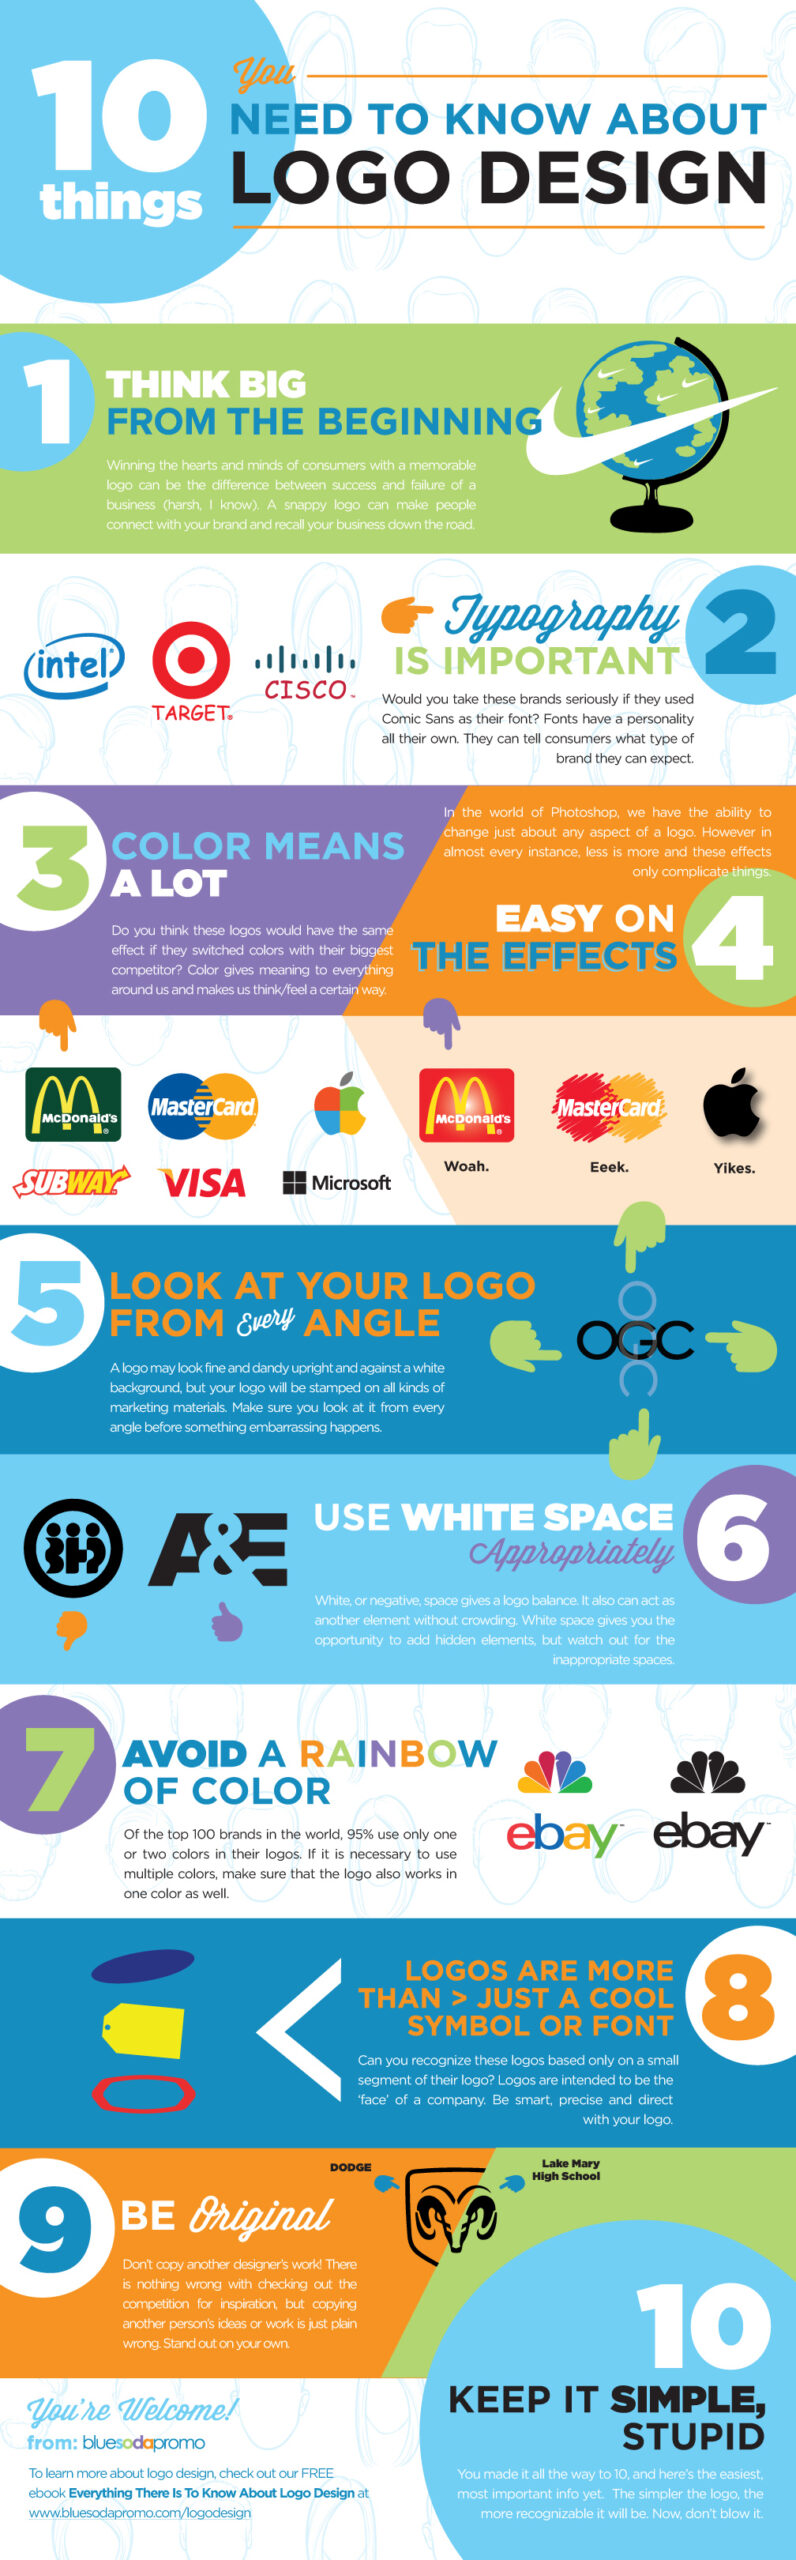 50+ Infographic Ideas, Examples & Templates for 2020